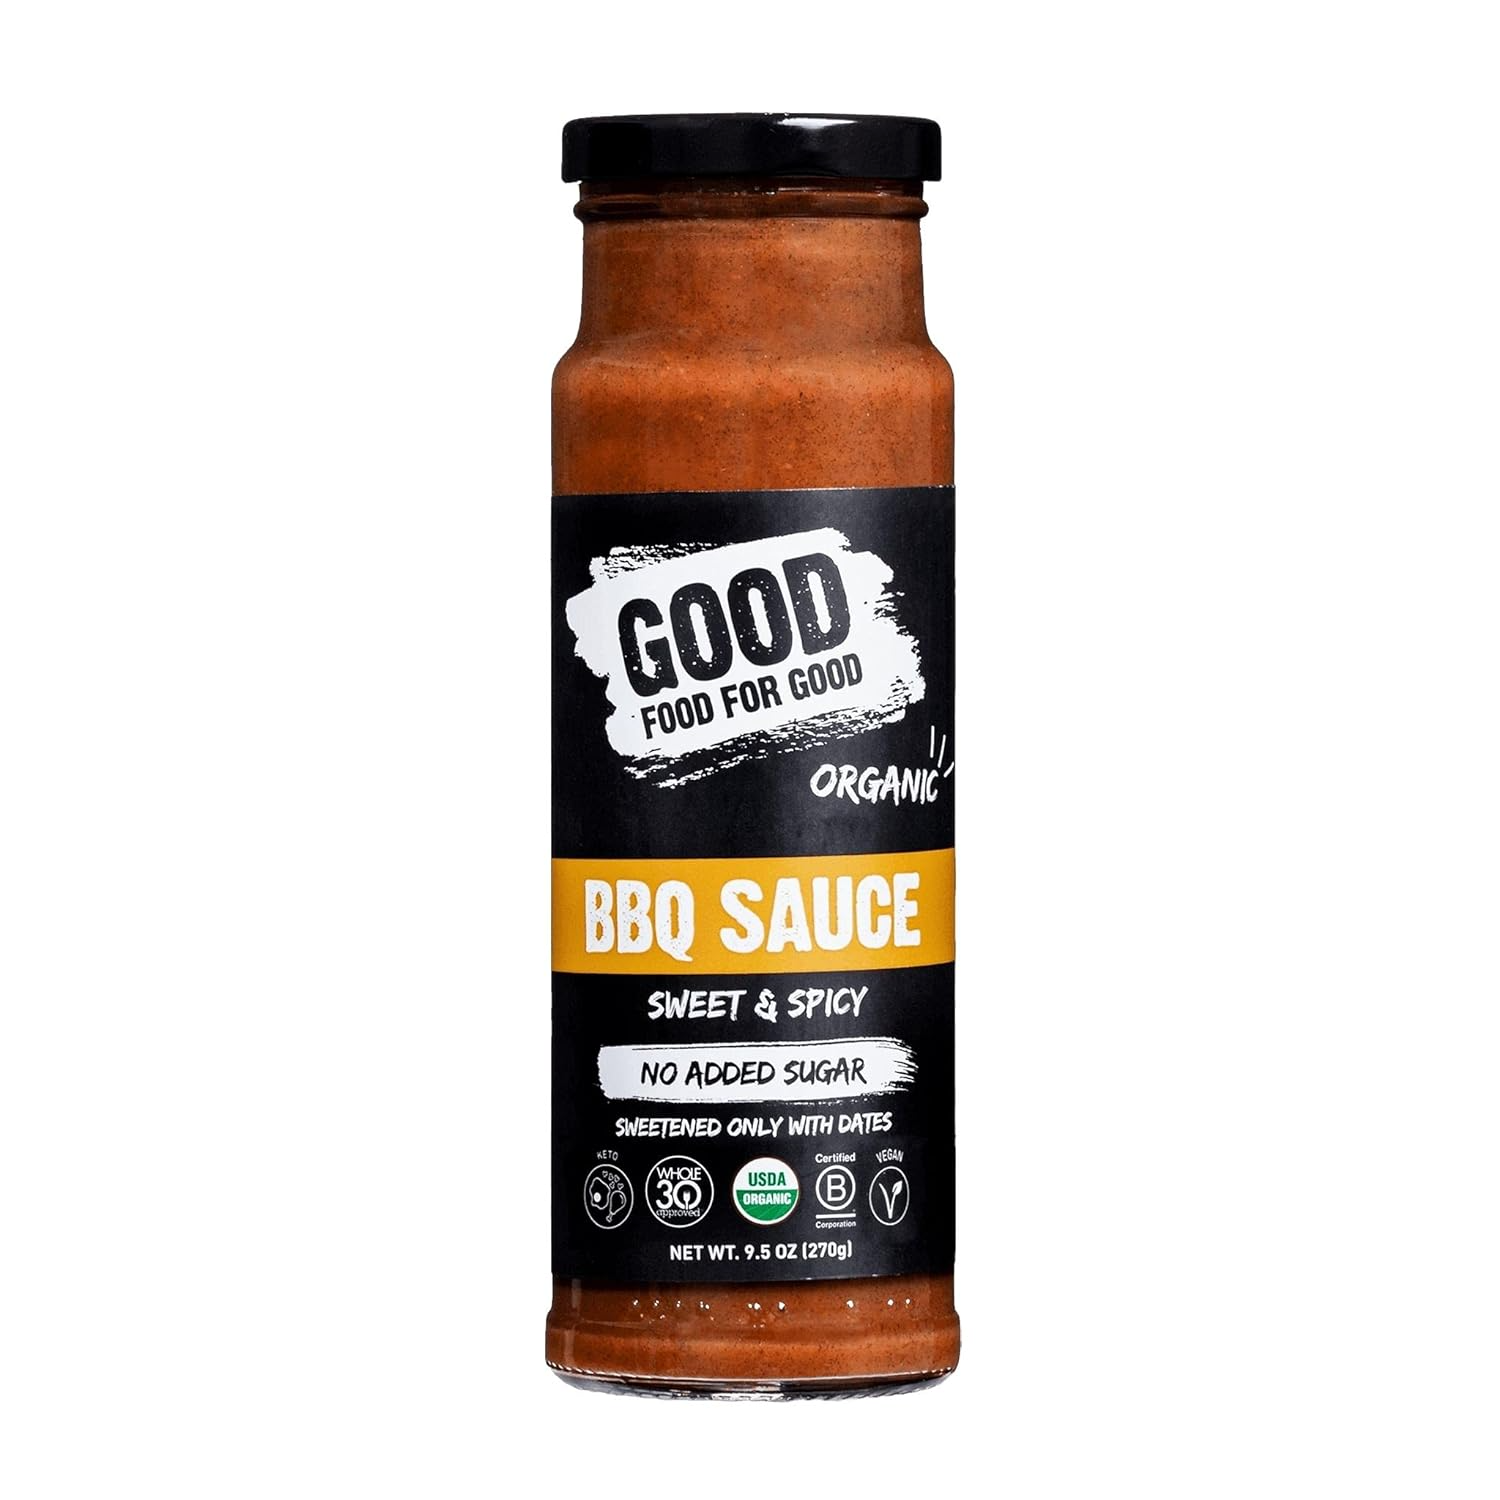 Good Food For Good Organic Sweet & Spicy BBQ Sauce, No Added Sugar, Whole30 Approved, 9.5 Oz - Barbecue Whizz...Watch My Smoke!